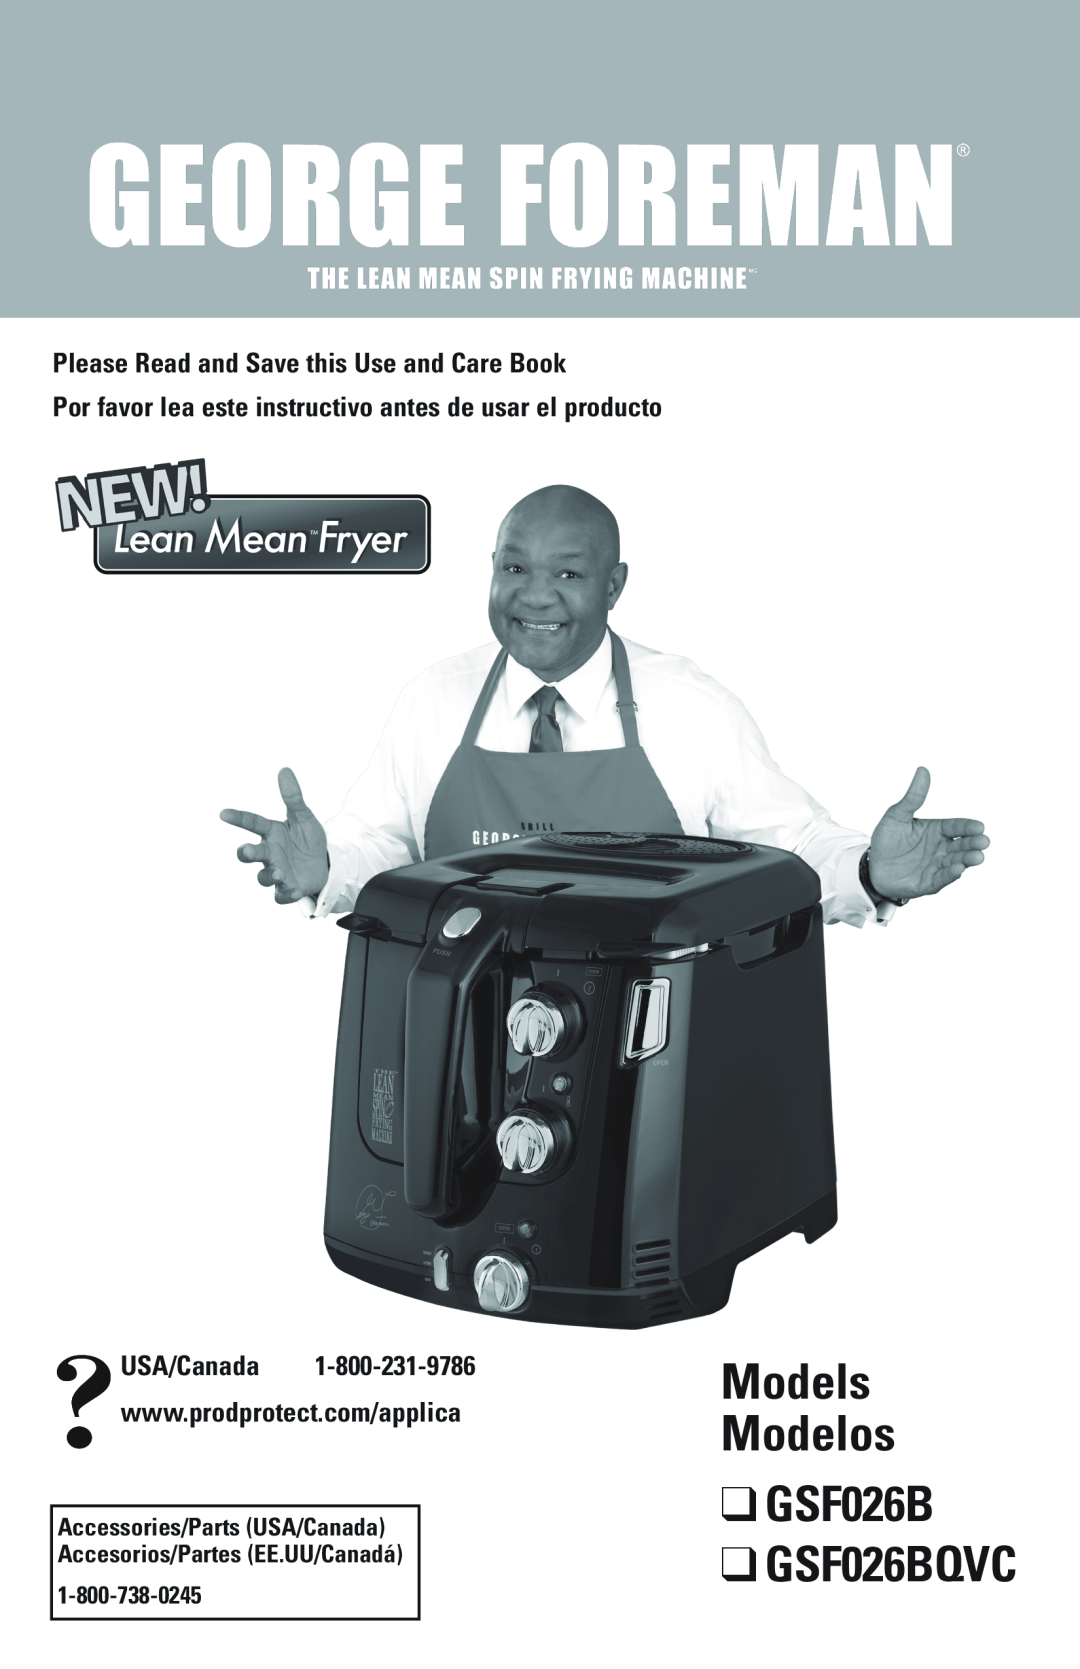 George Foreman manual Models Modelos GSF026B, GSF026BQVC, Please Read and Save this Use and Care Book 